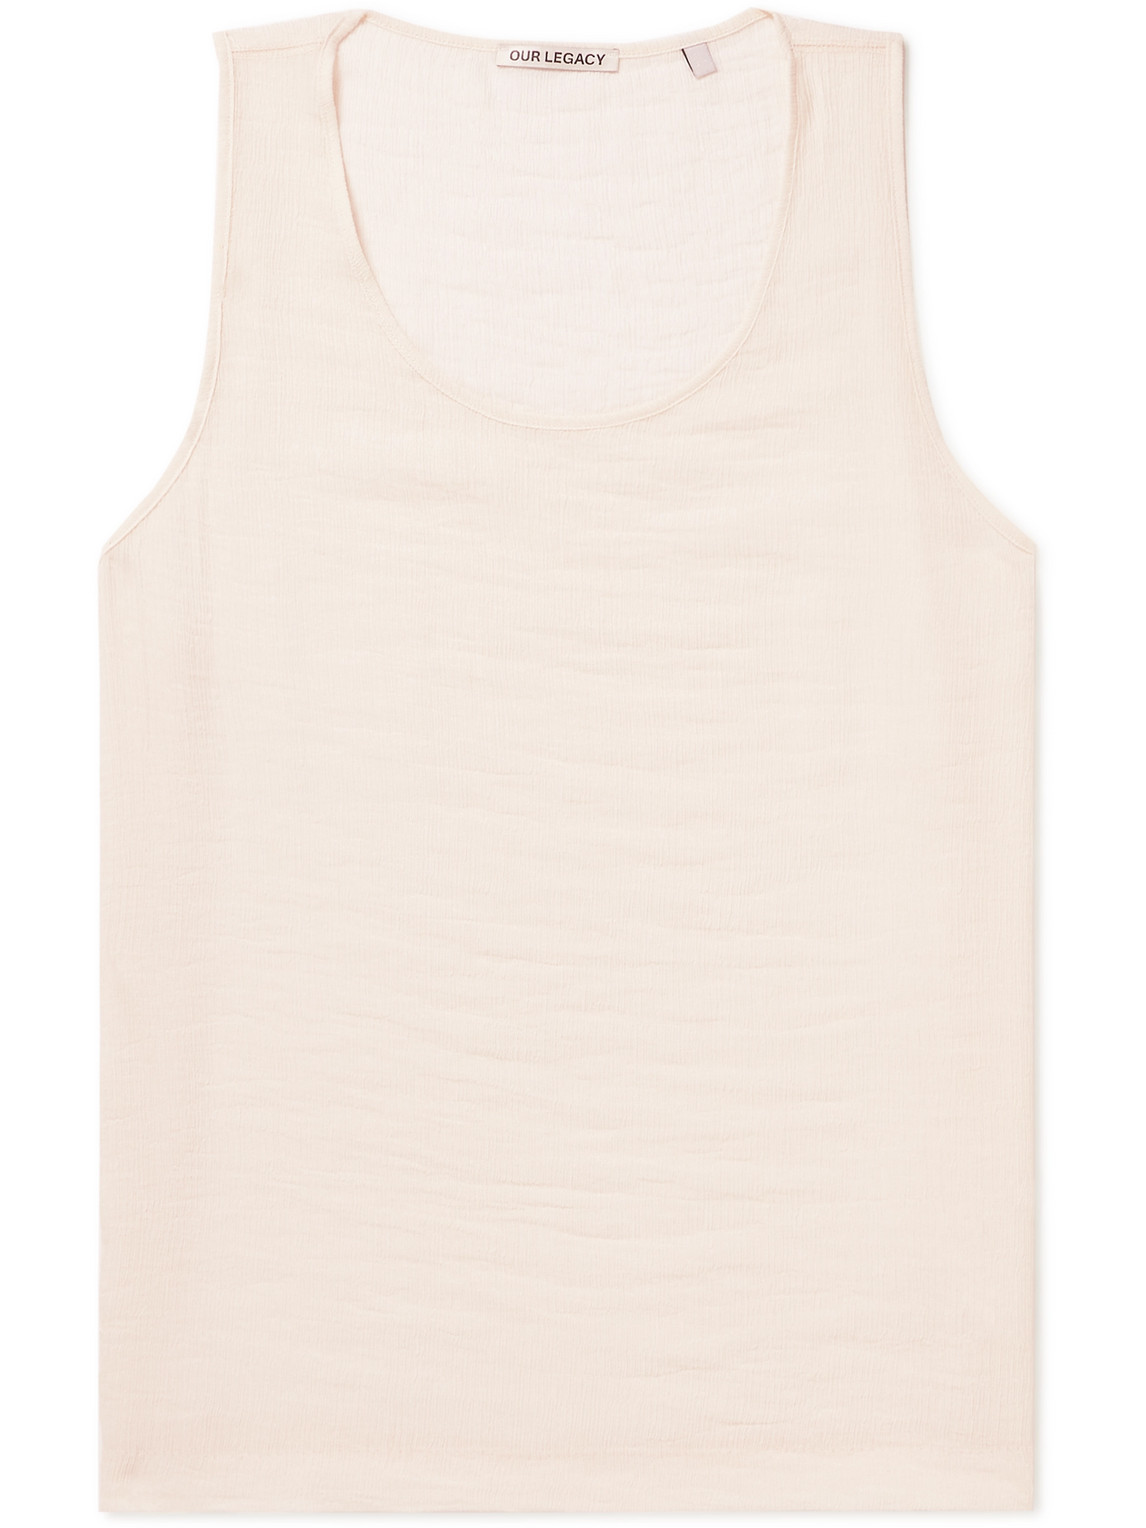 OUR LEGACY CRINKLED-CREPE TANK TOP